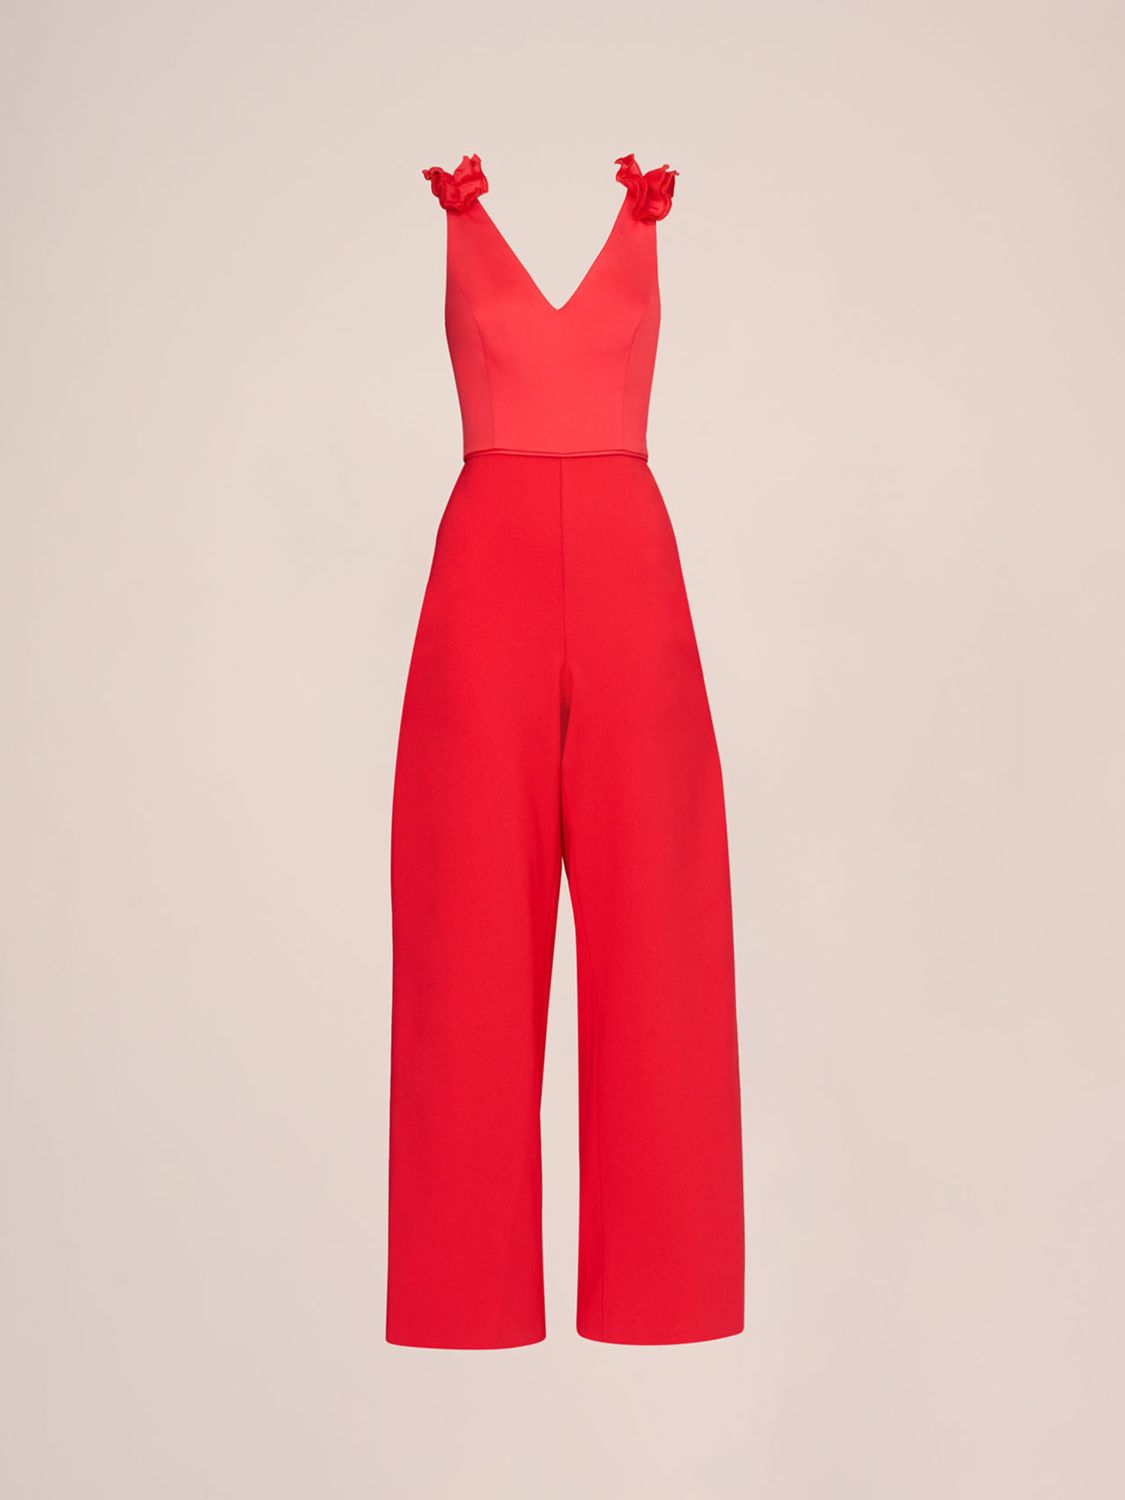 Adrianna Papell Satin Crepe Wide Leg Jumpsuits, Calypso Coral, 14